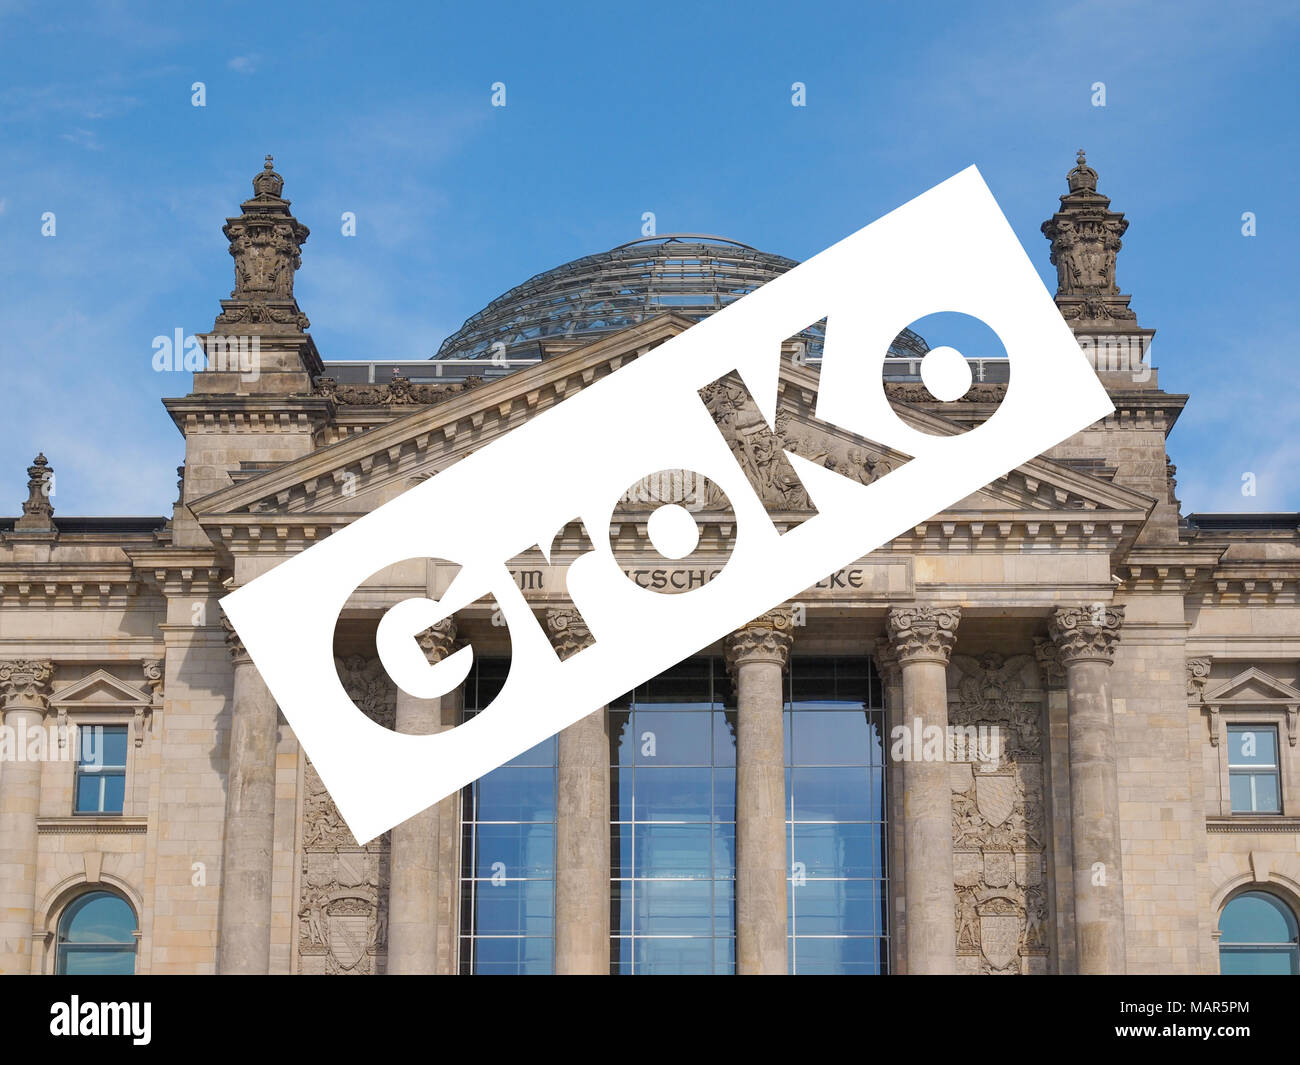 GroKo (short for Grosse Koalition, meaning Grand Coalition) superimposed to the Reichstag houses of parliament in Berlin, Germany Stock Photo